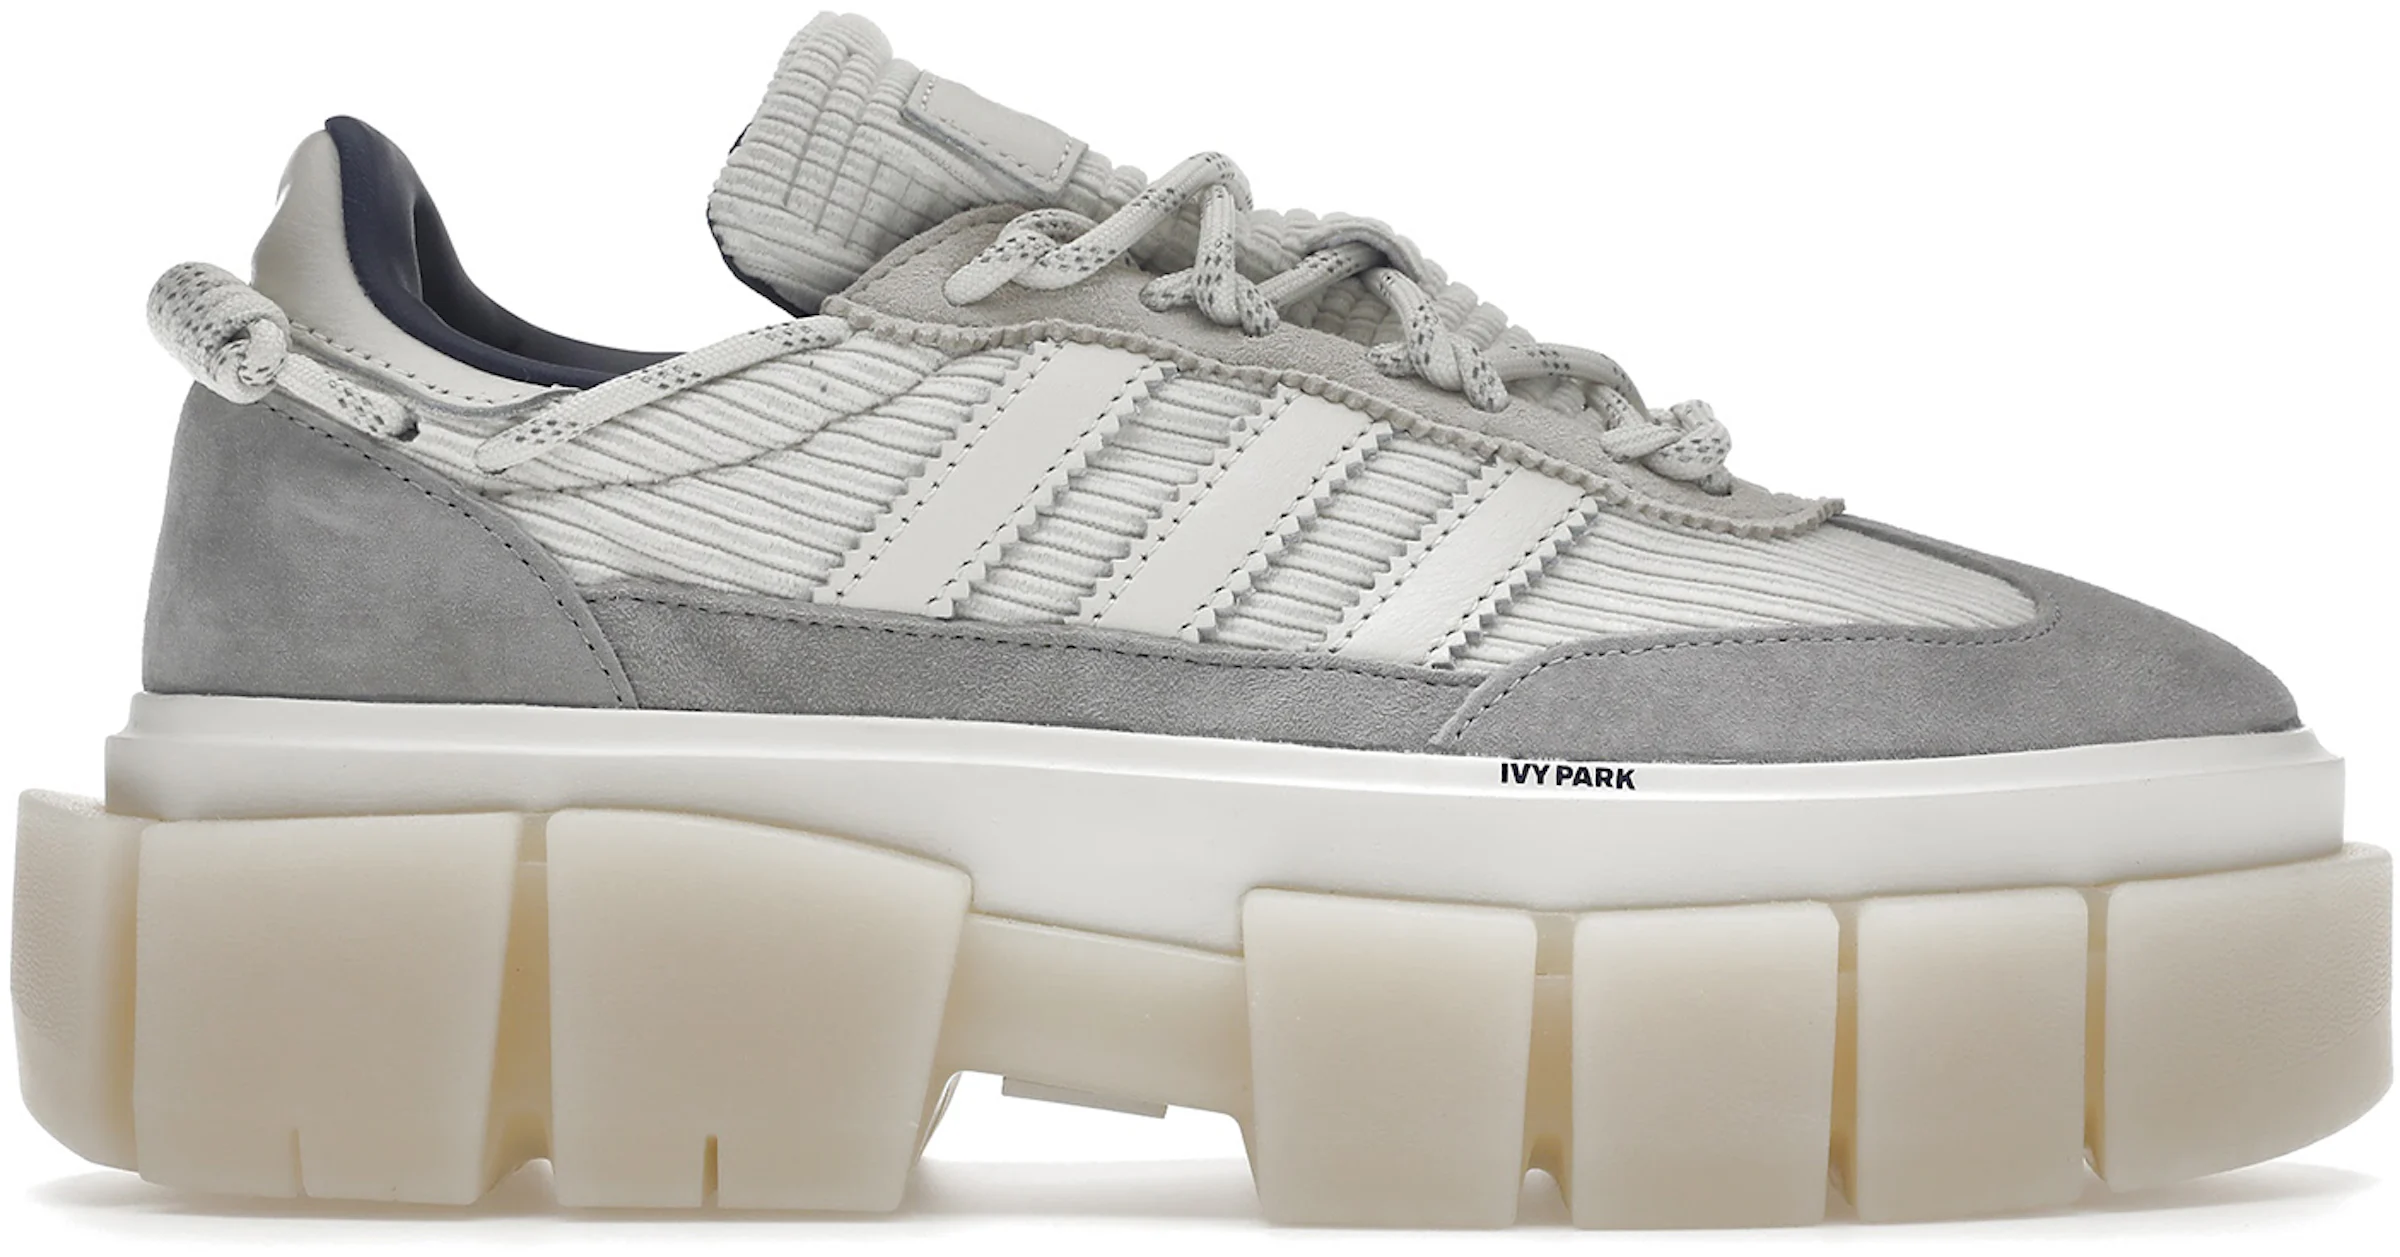 First Look At New Adidas And Ivy Park Super Super Sleek Chunky